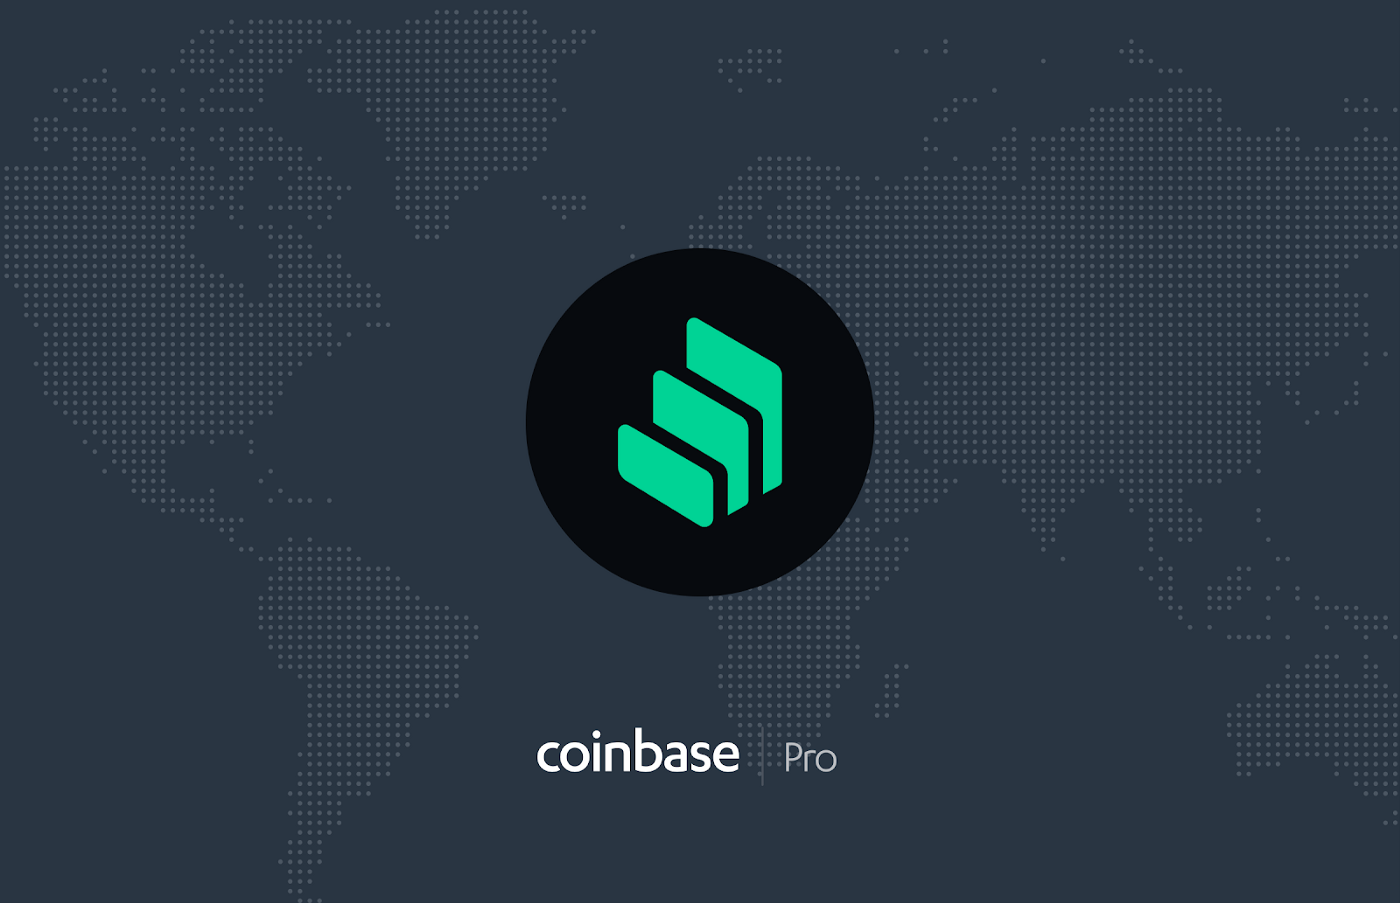 Compound (COMP) is launching on Coinbase Pro